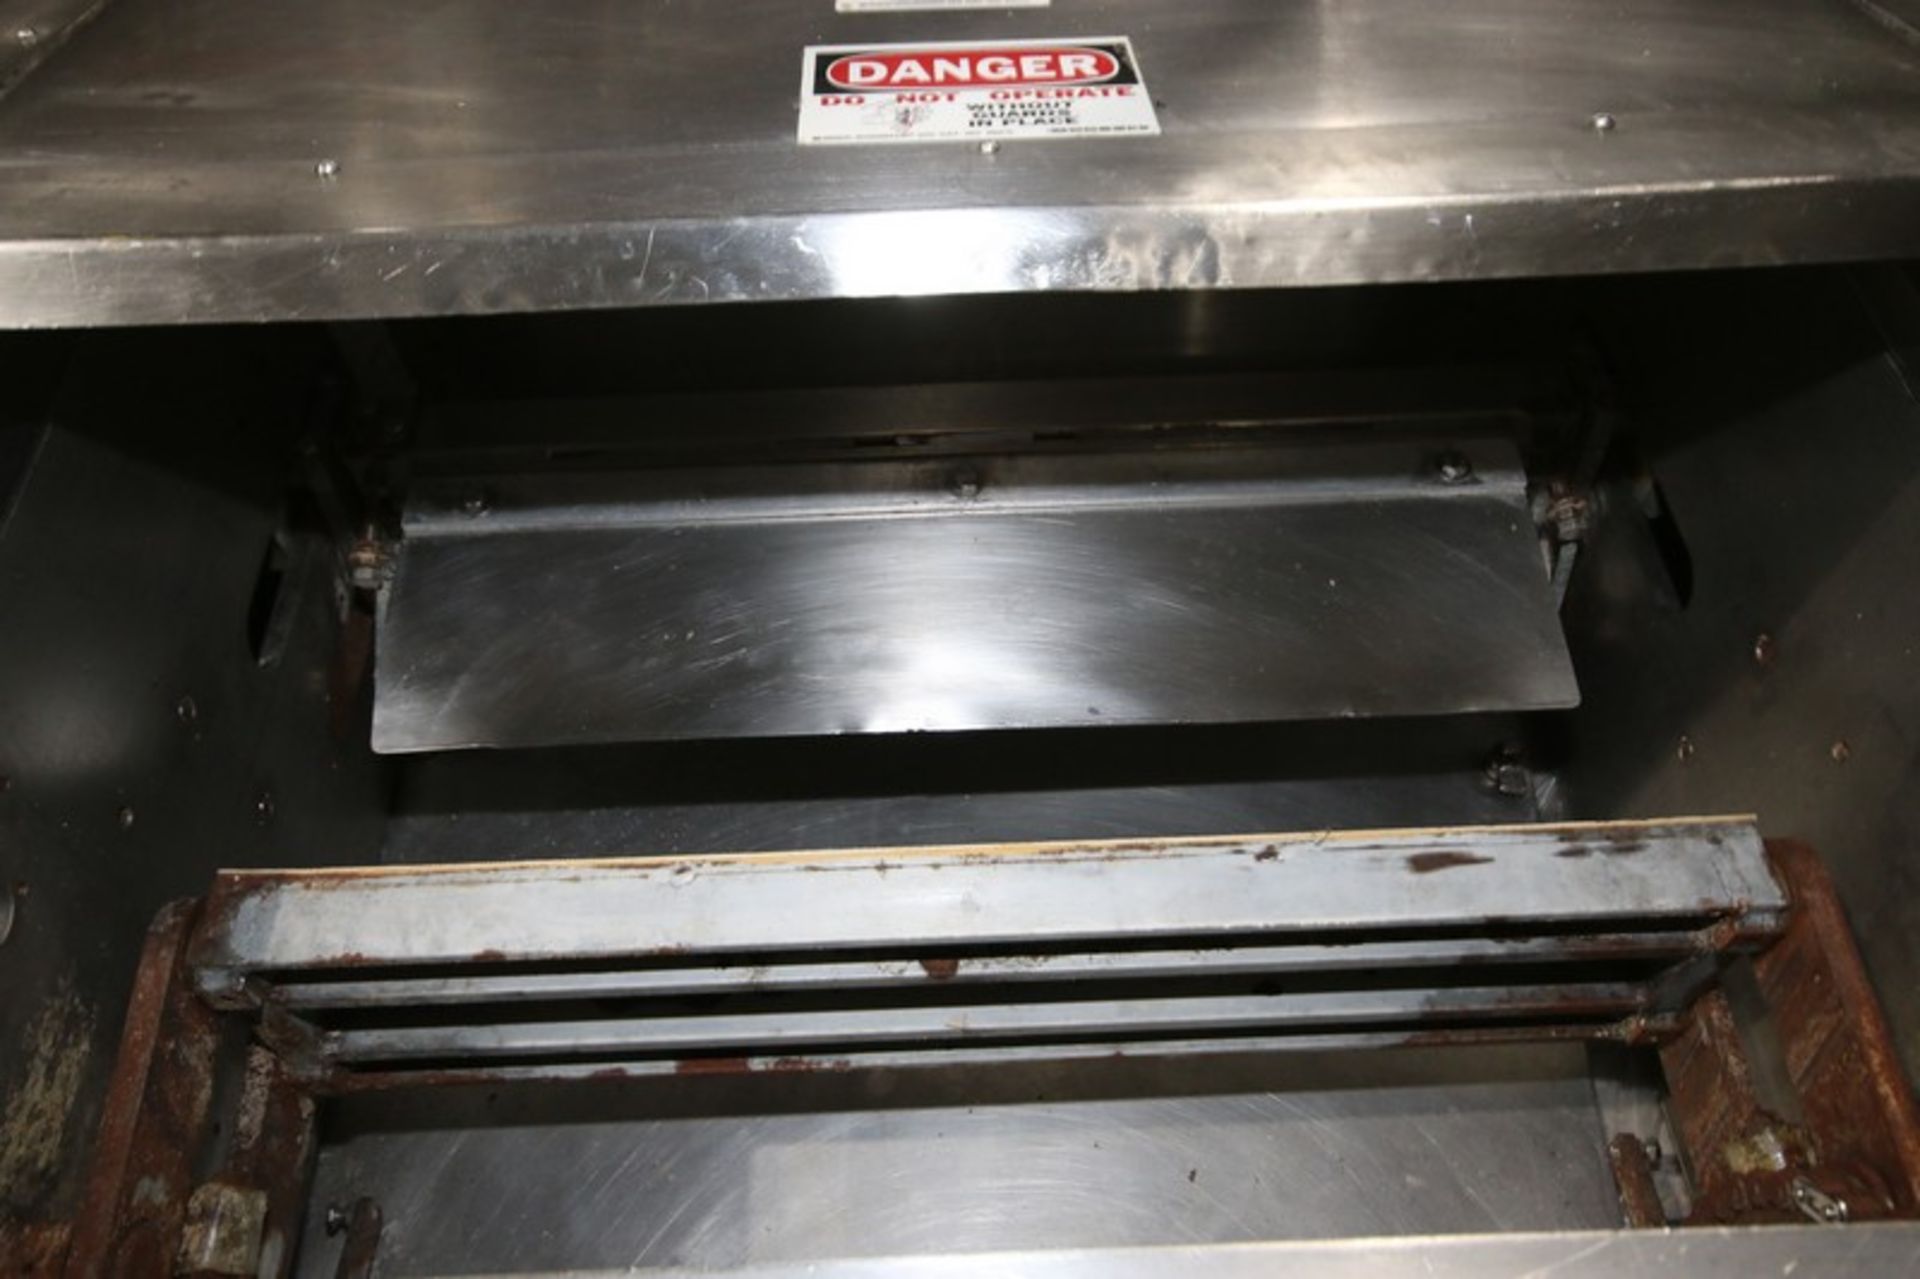 Moline 23-1/2" W S/S Guillotine, with Aprox. 24-1/2" L x 8-1/2" W Cutting Table, Mounted on S/S - Image 2 of 7